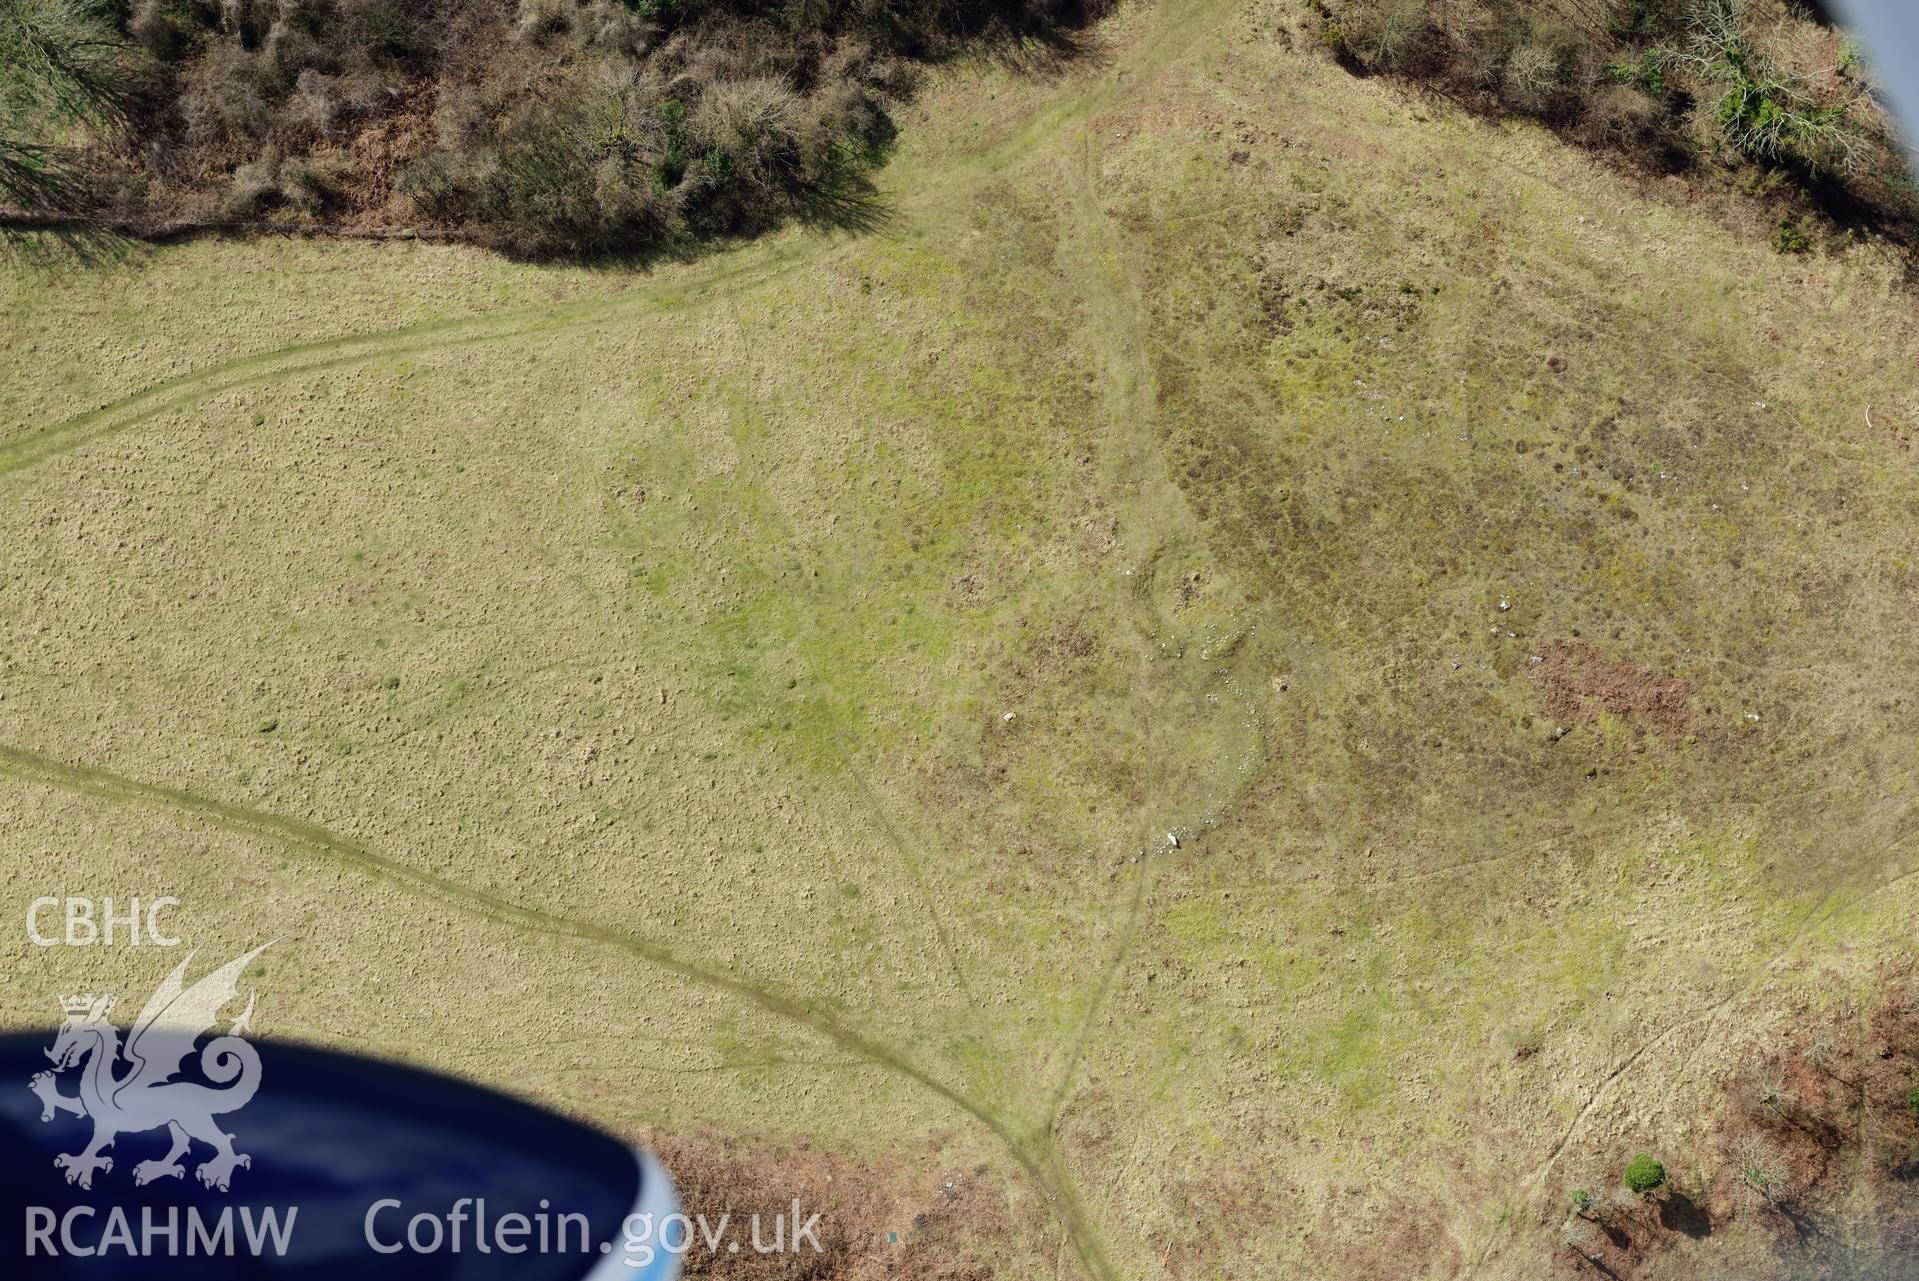 Stackpole Warren Ancient Village. Baseline aerial reconnaissance survey for the CHERISH Project. ? Crown: CHERISH PROJECT 2018. Produced with EU funds through the Ireland Wales Co-operation Programme 2014-2020. All material made freely available through the Open Government Licence.